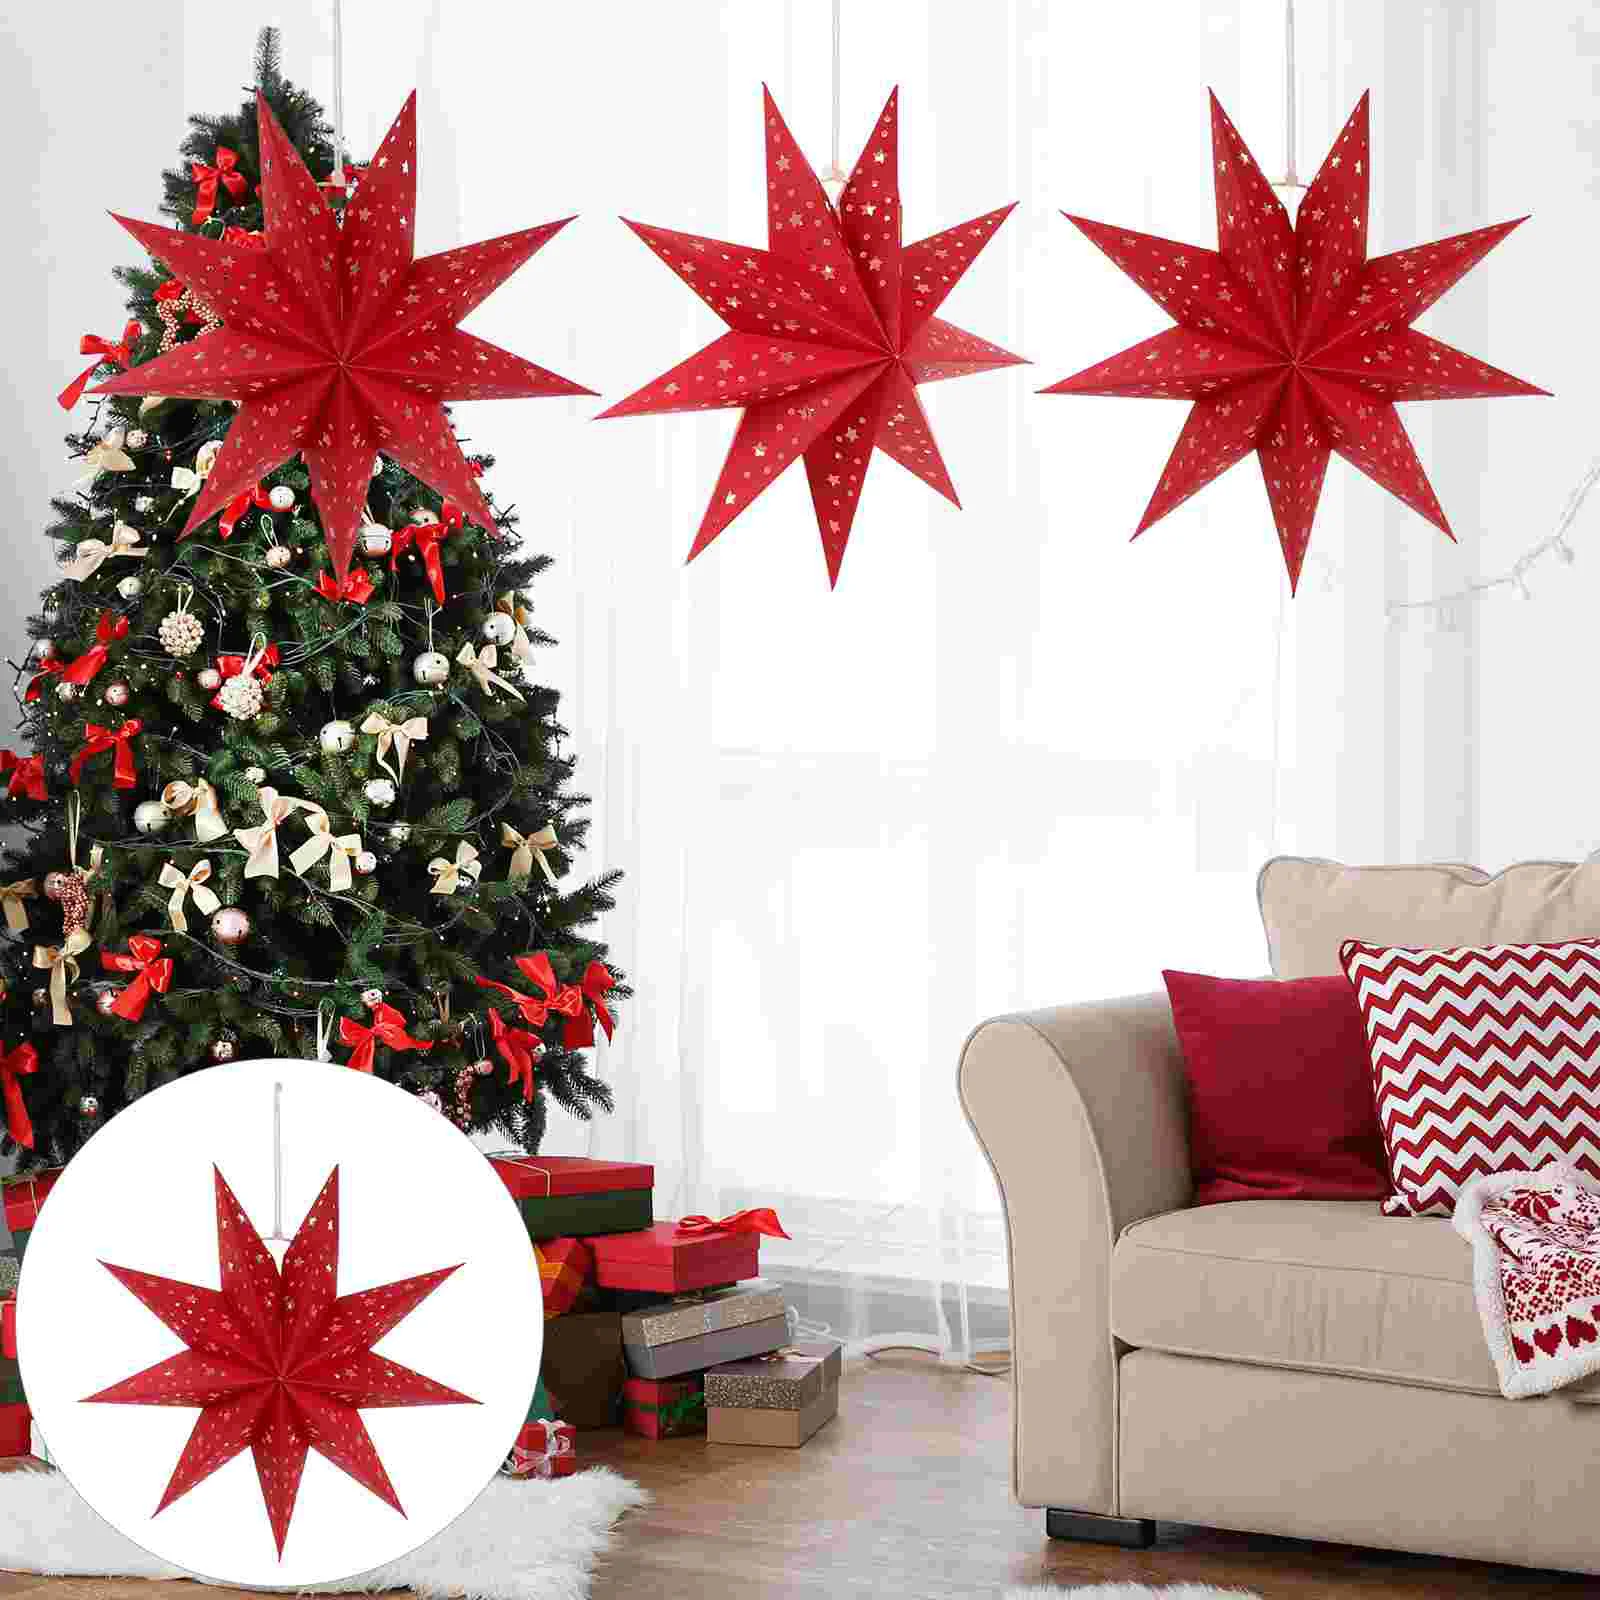 

3Pcs Paper Star Lantern Lampshade 35Cm 9 Pointed Star Paper Lanterns Hanging Lampshade Decorations Christmas Festive New Year